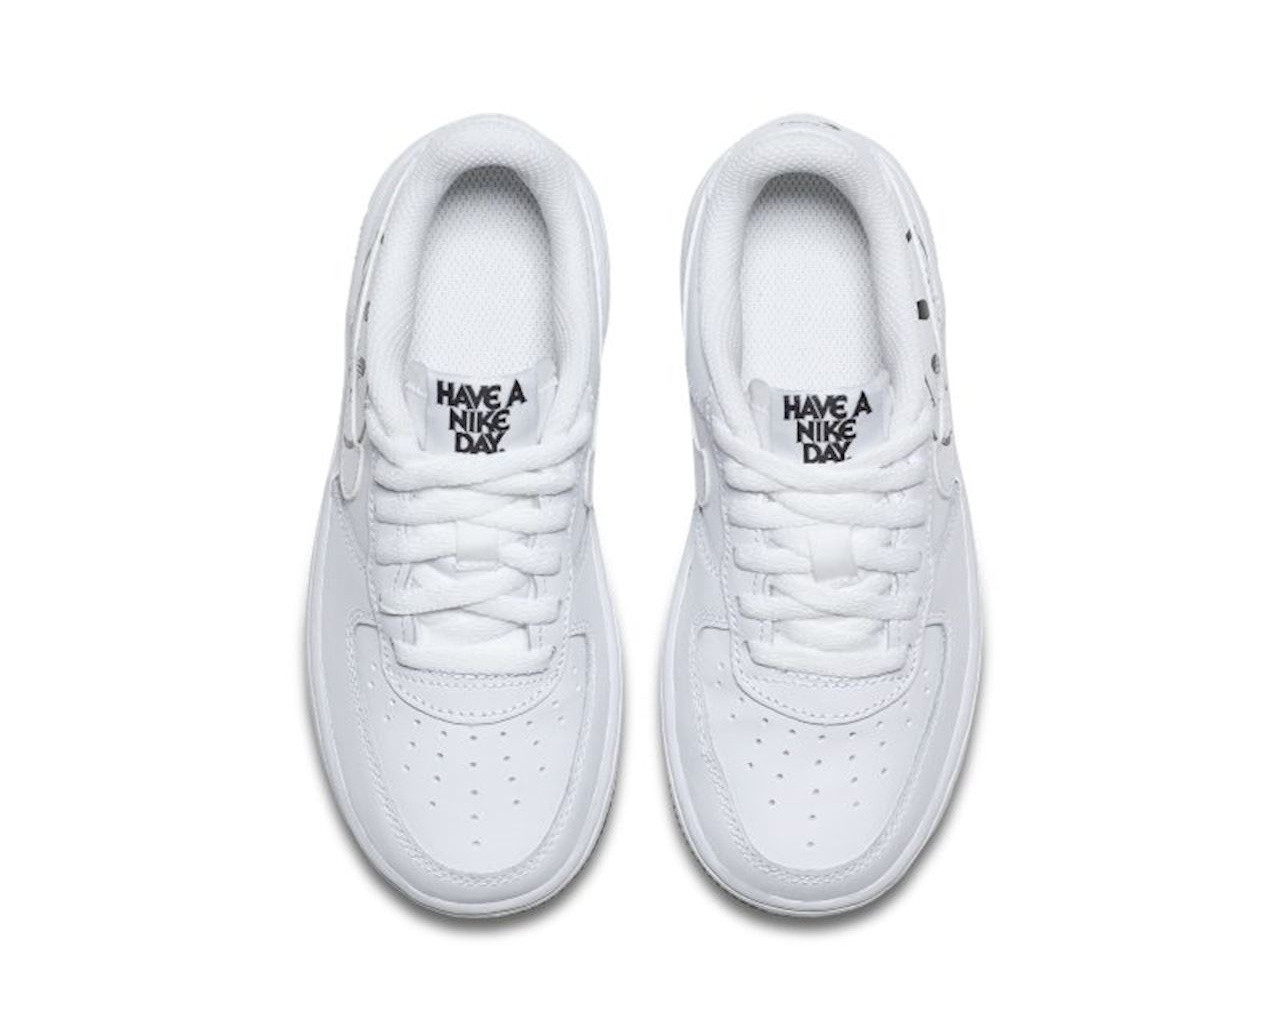 Bad factor traitor Forgiving Nike tenis nike renew retaliation tr 2 masculino preto branco HZM Have A  Nike Day White Black Shoes BQ8274 - 100 - StclaircomoShops - these are the nike  air force 1 releases we can expect in summer